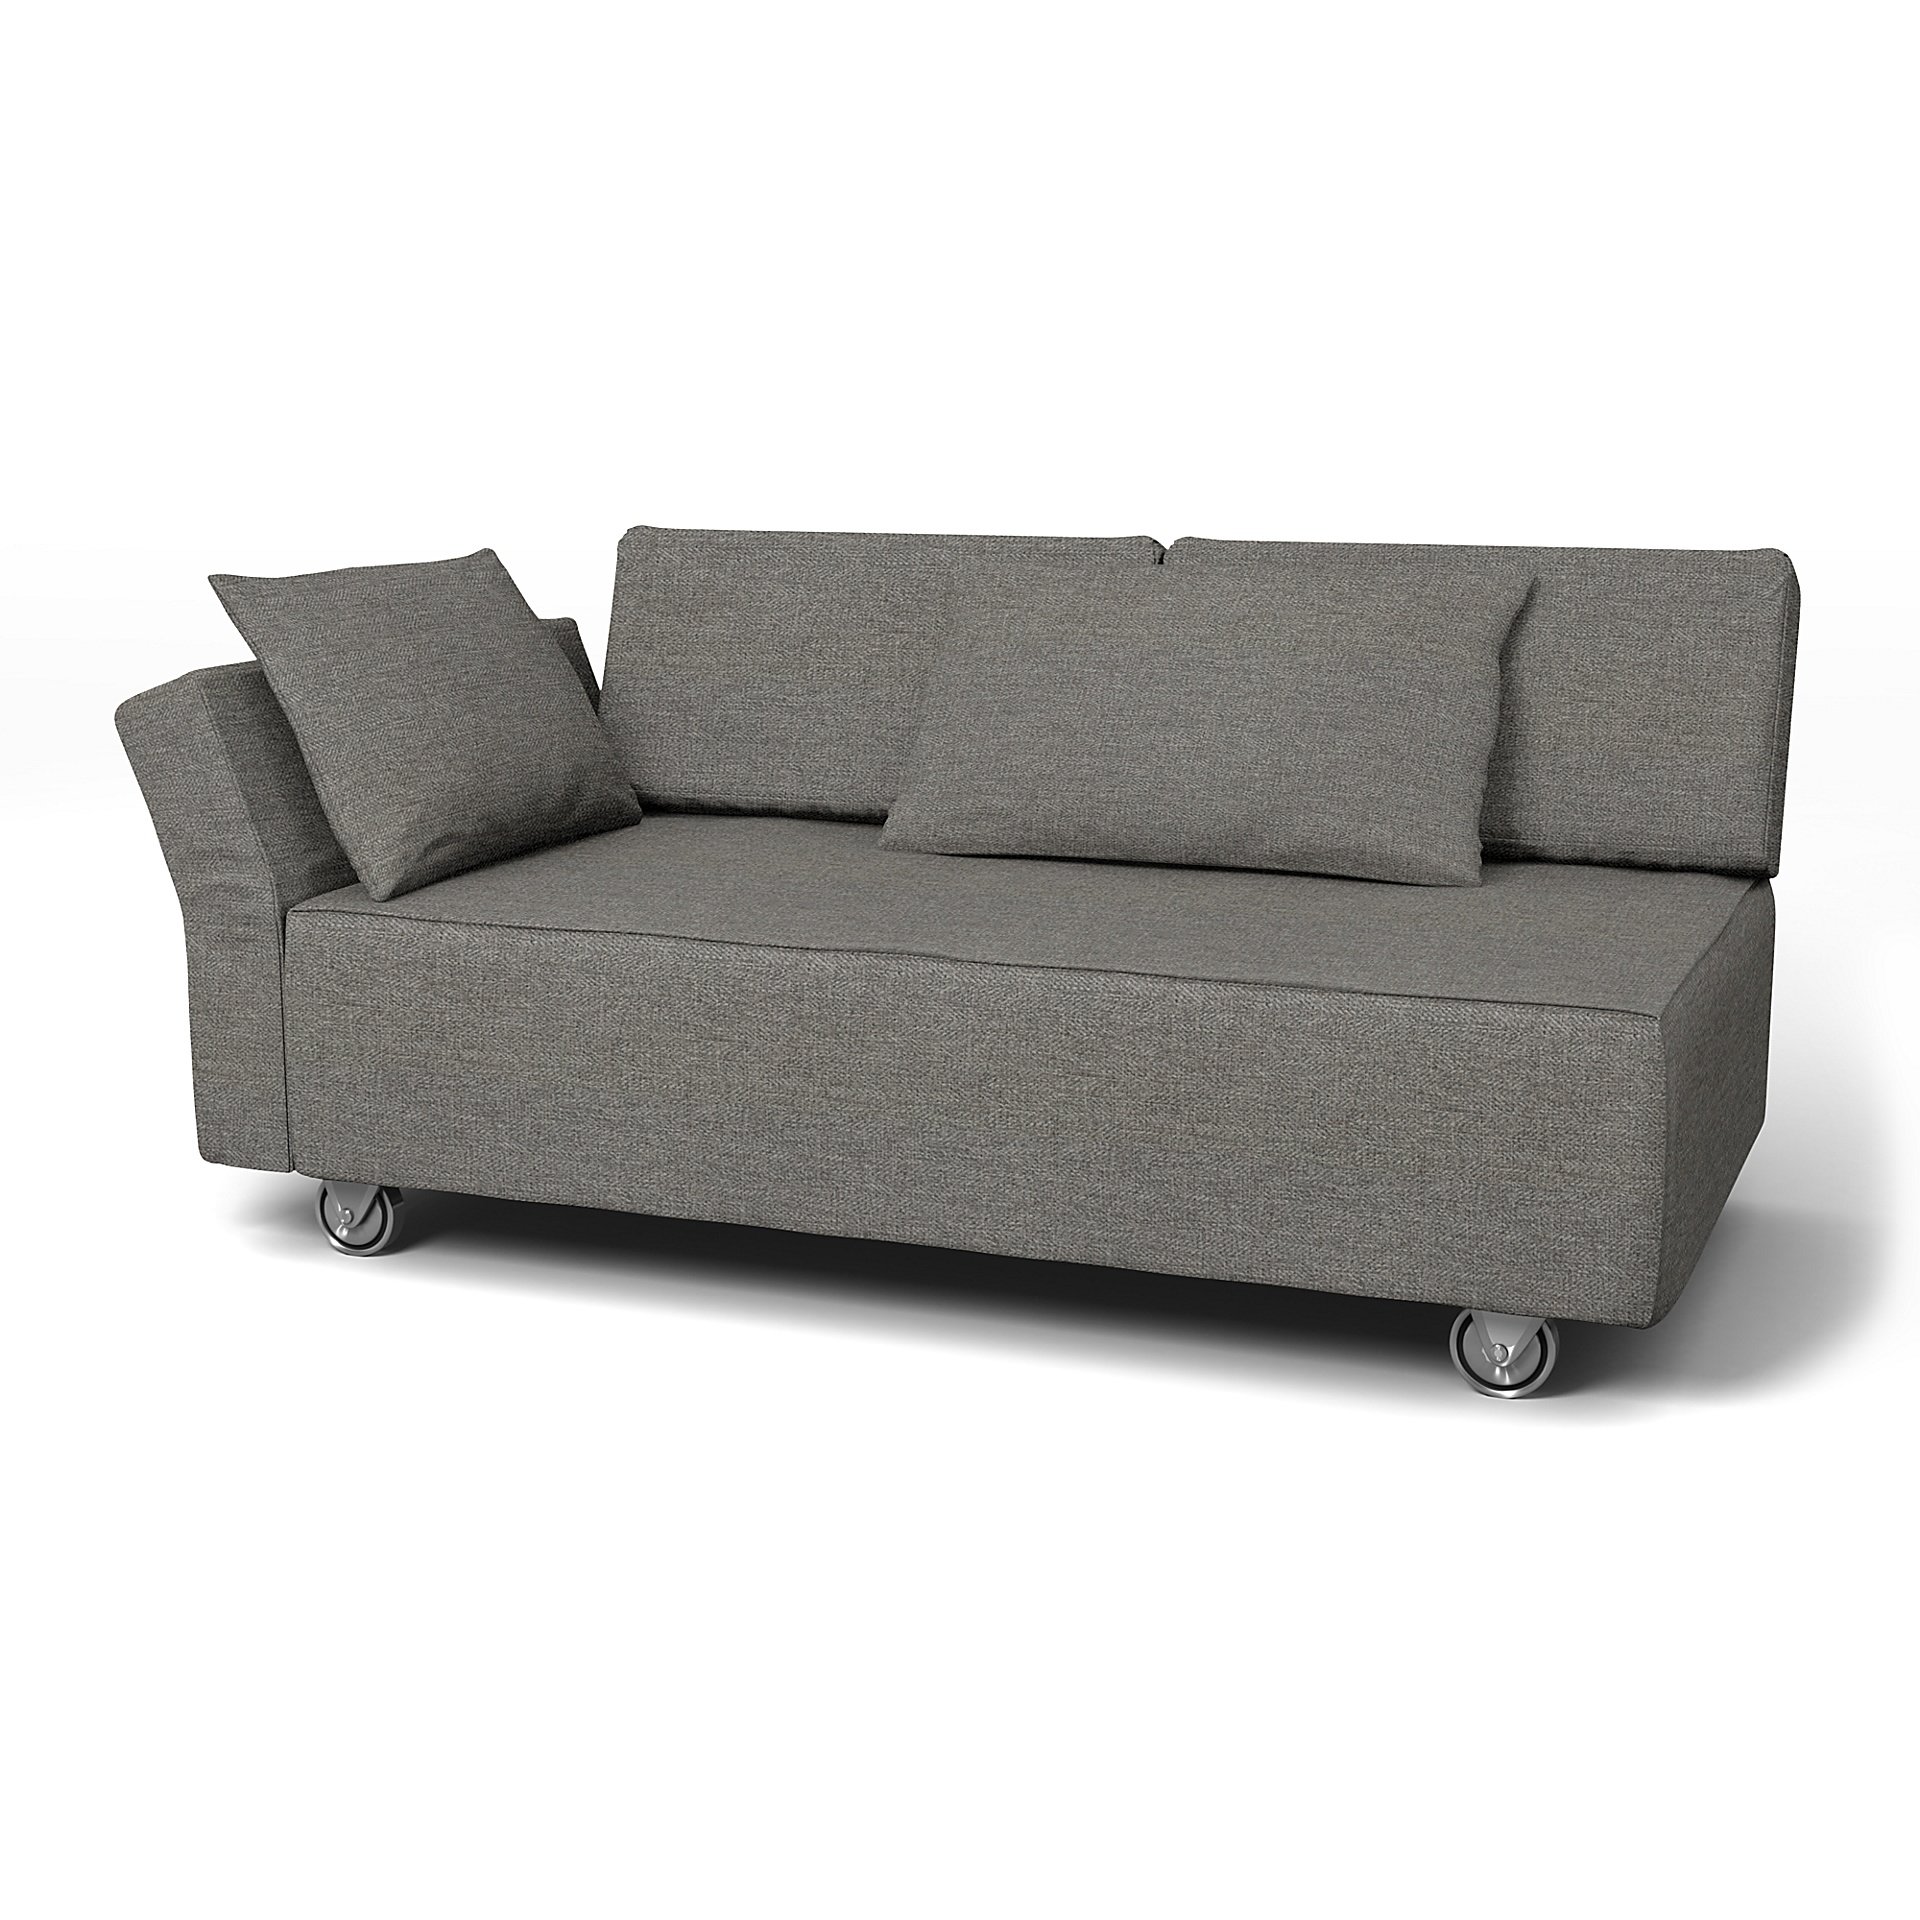 IKEA - Falsterbo 2 Seat Sofa with Left Arm Cover, Taupe, Boucle & Texture - Bemz